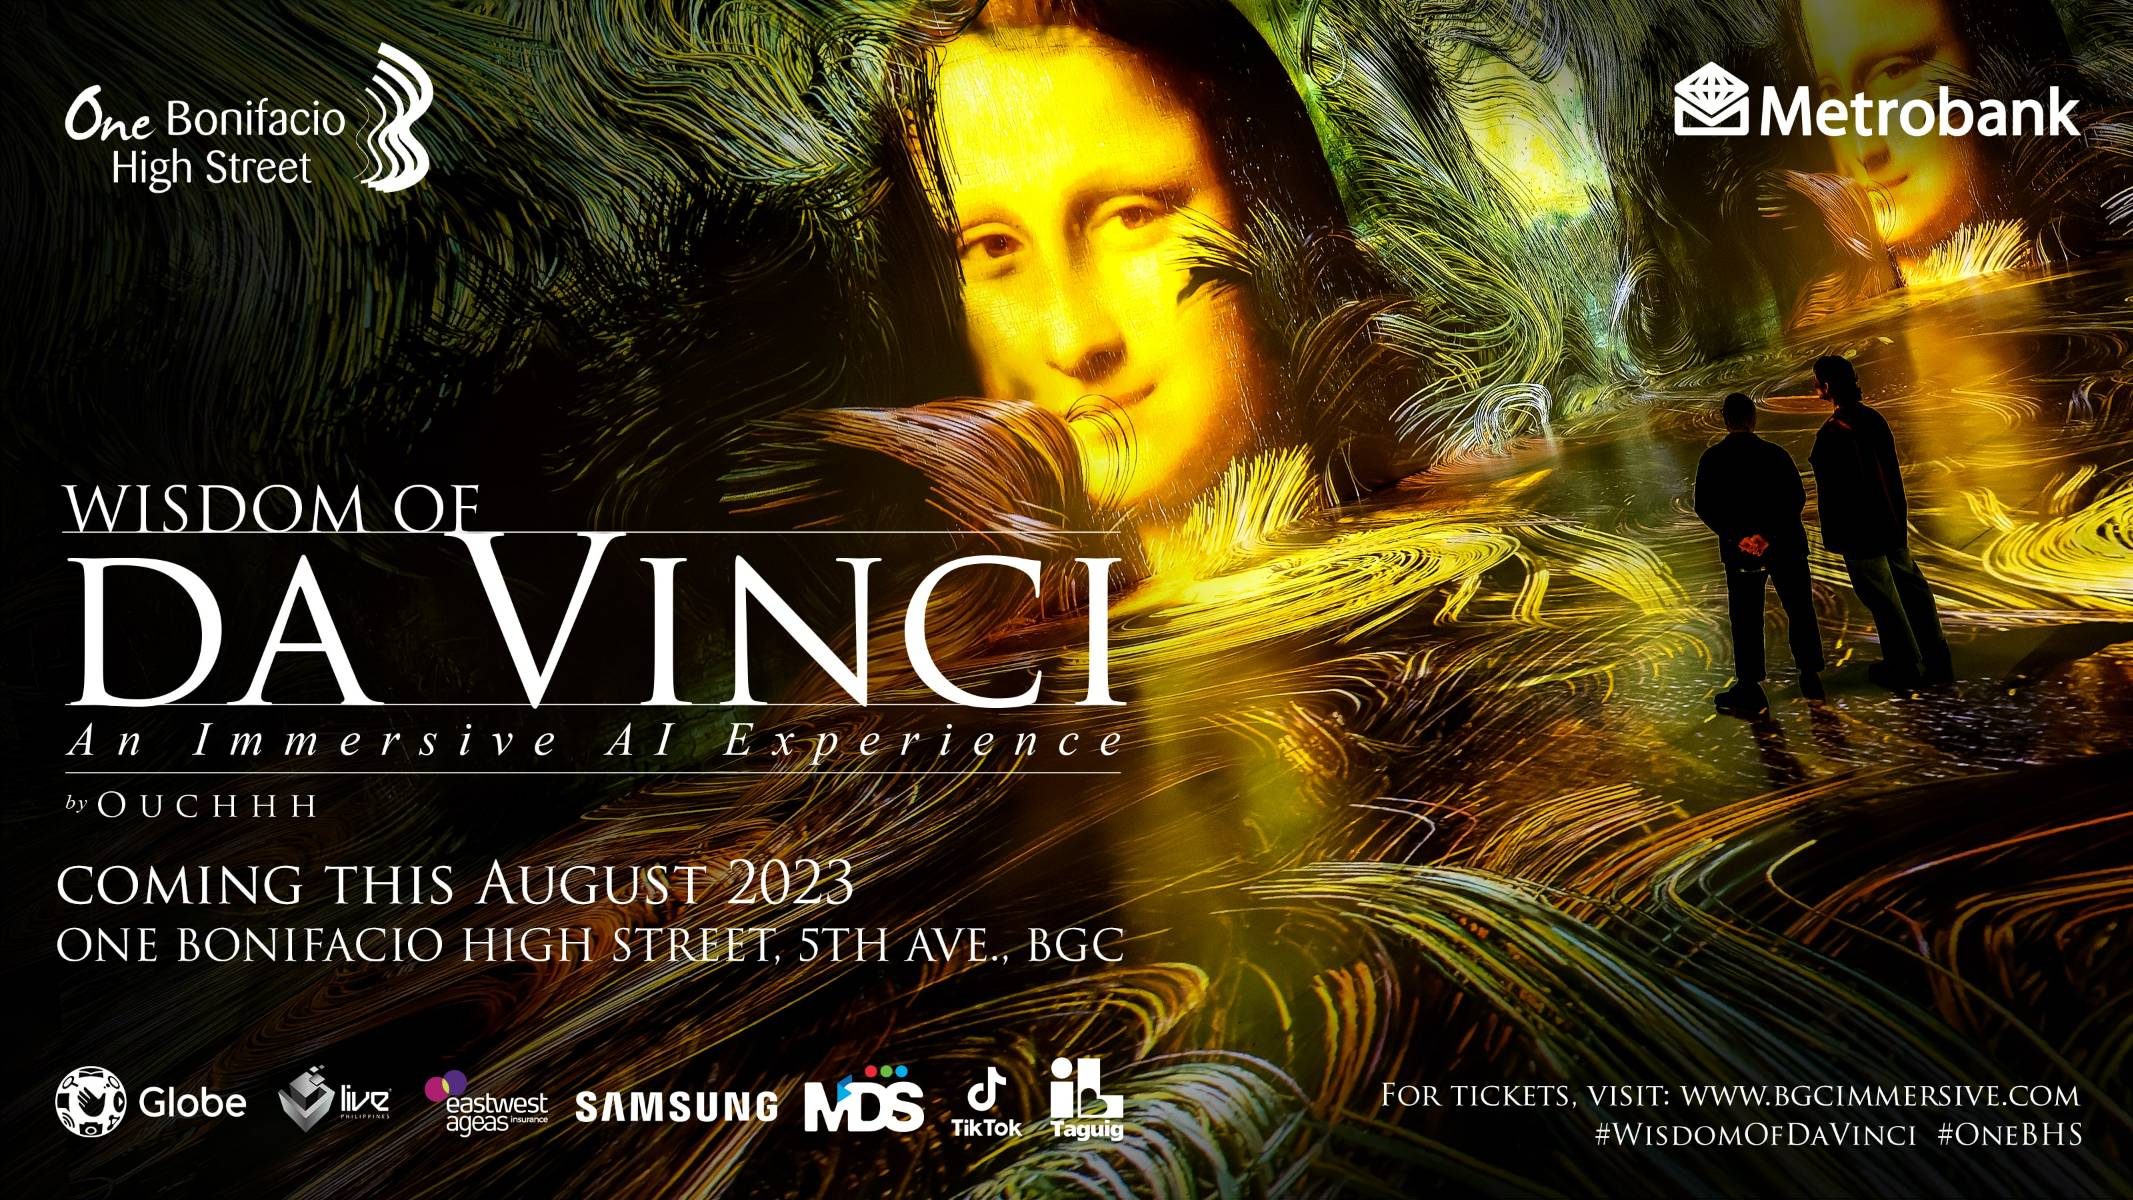 Experience a World of Colors with the “Wisdom of Da Vinci” at BGC